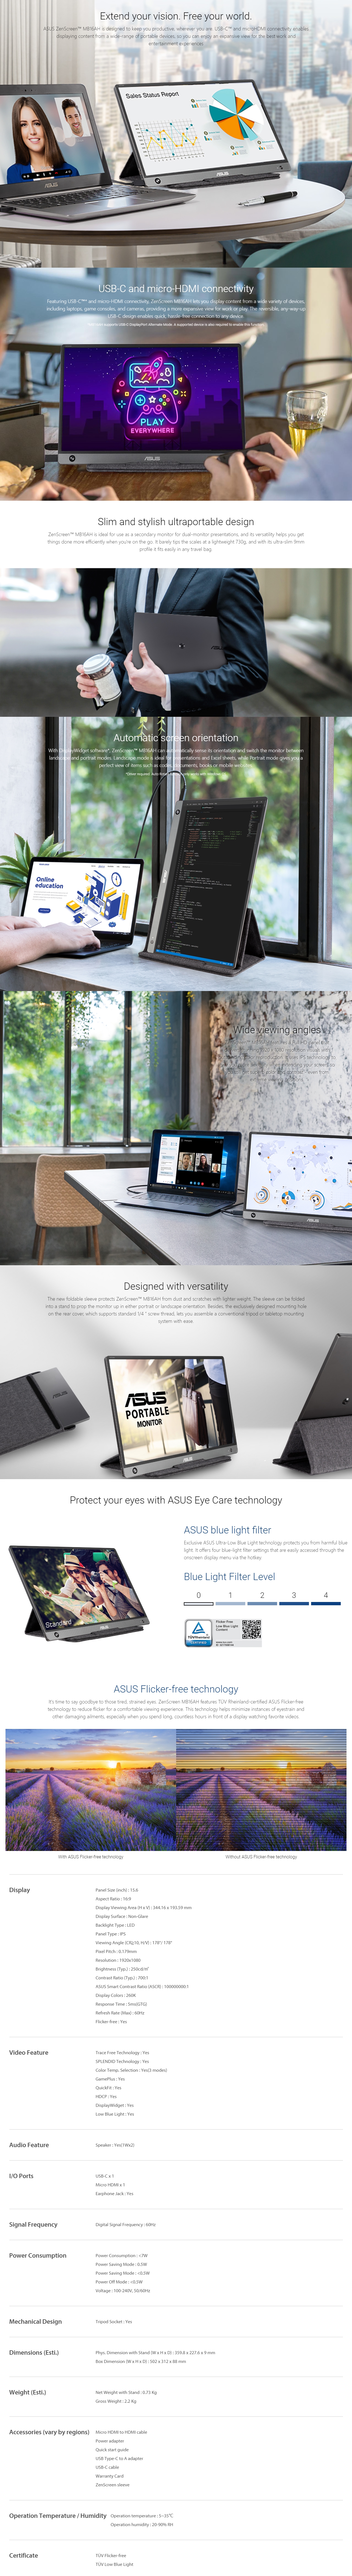 A large marketing image providing additional information about the product ASUS ZenScreen MB16AH 15.6" FHD 60Hz IPS Portable Monitor - Additional alt info not provided